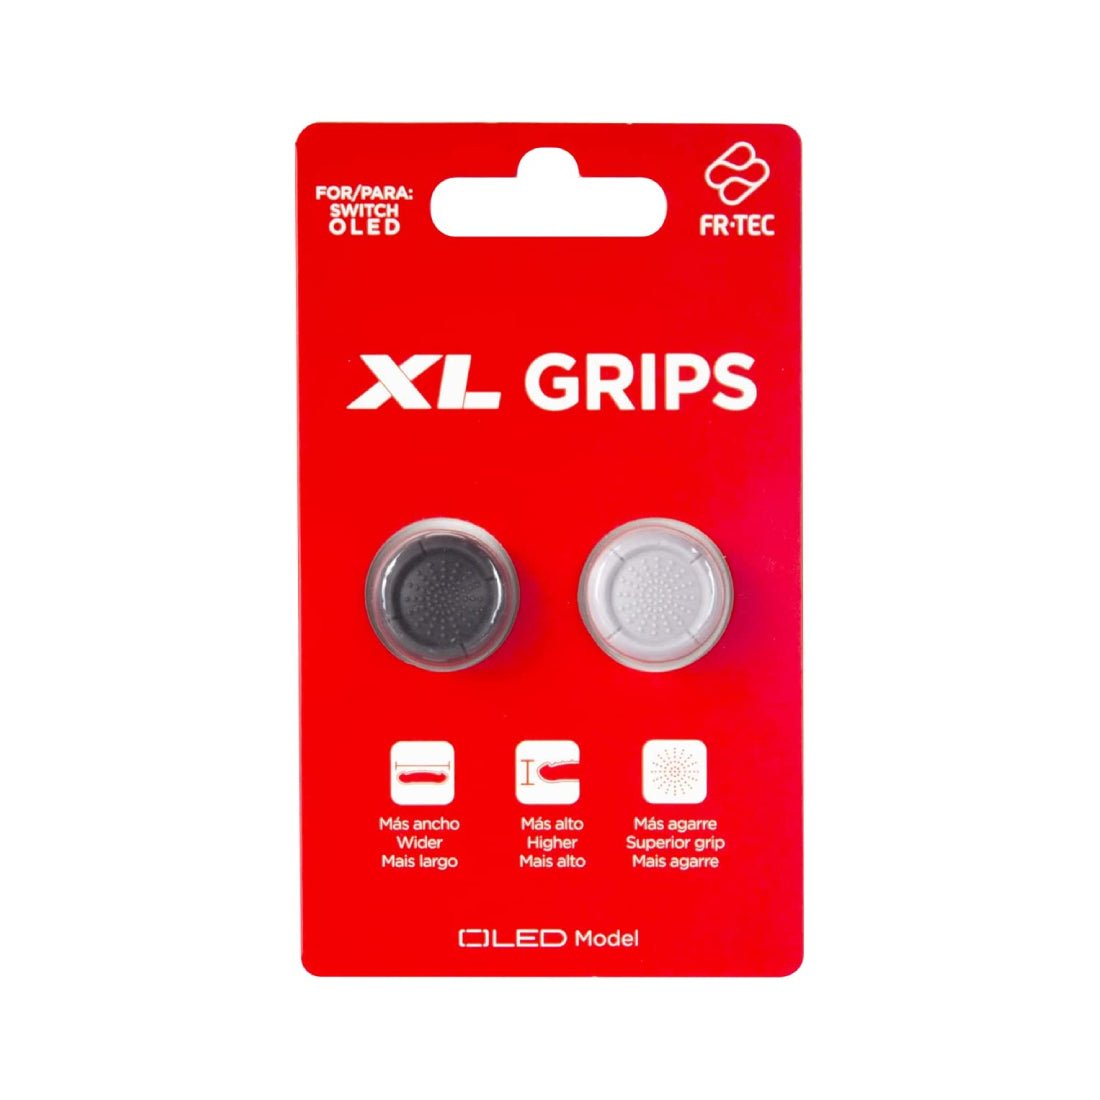 FR-TEC OLED Grips XL for Nintendo Switch - Store 974 | ستور ٩٧٤